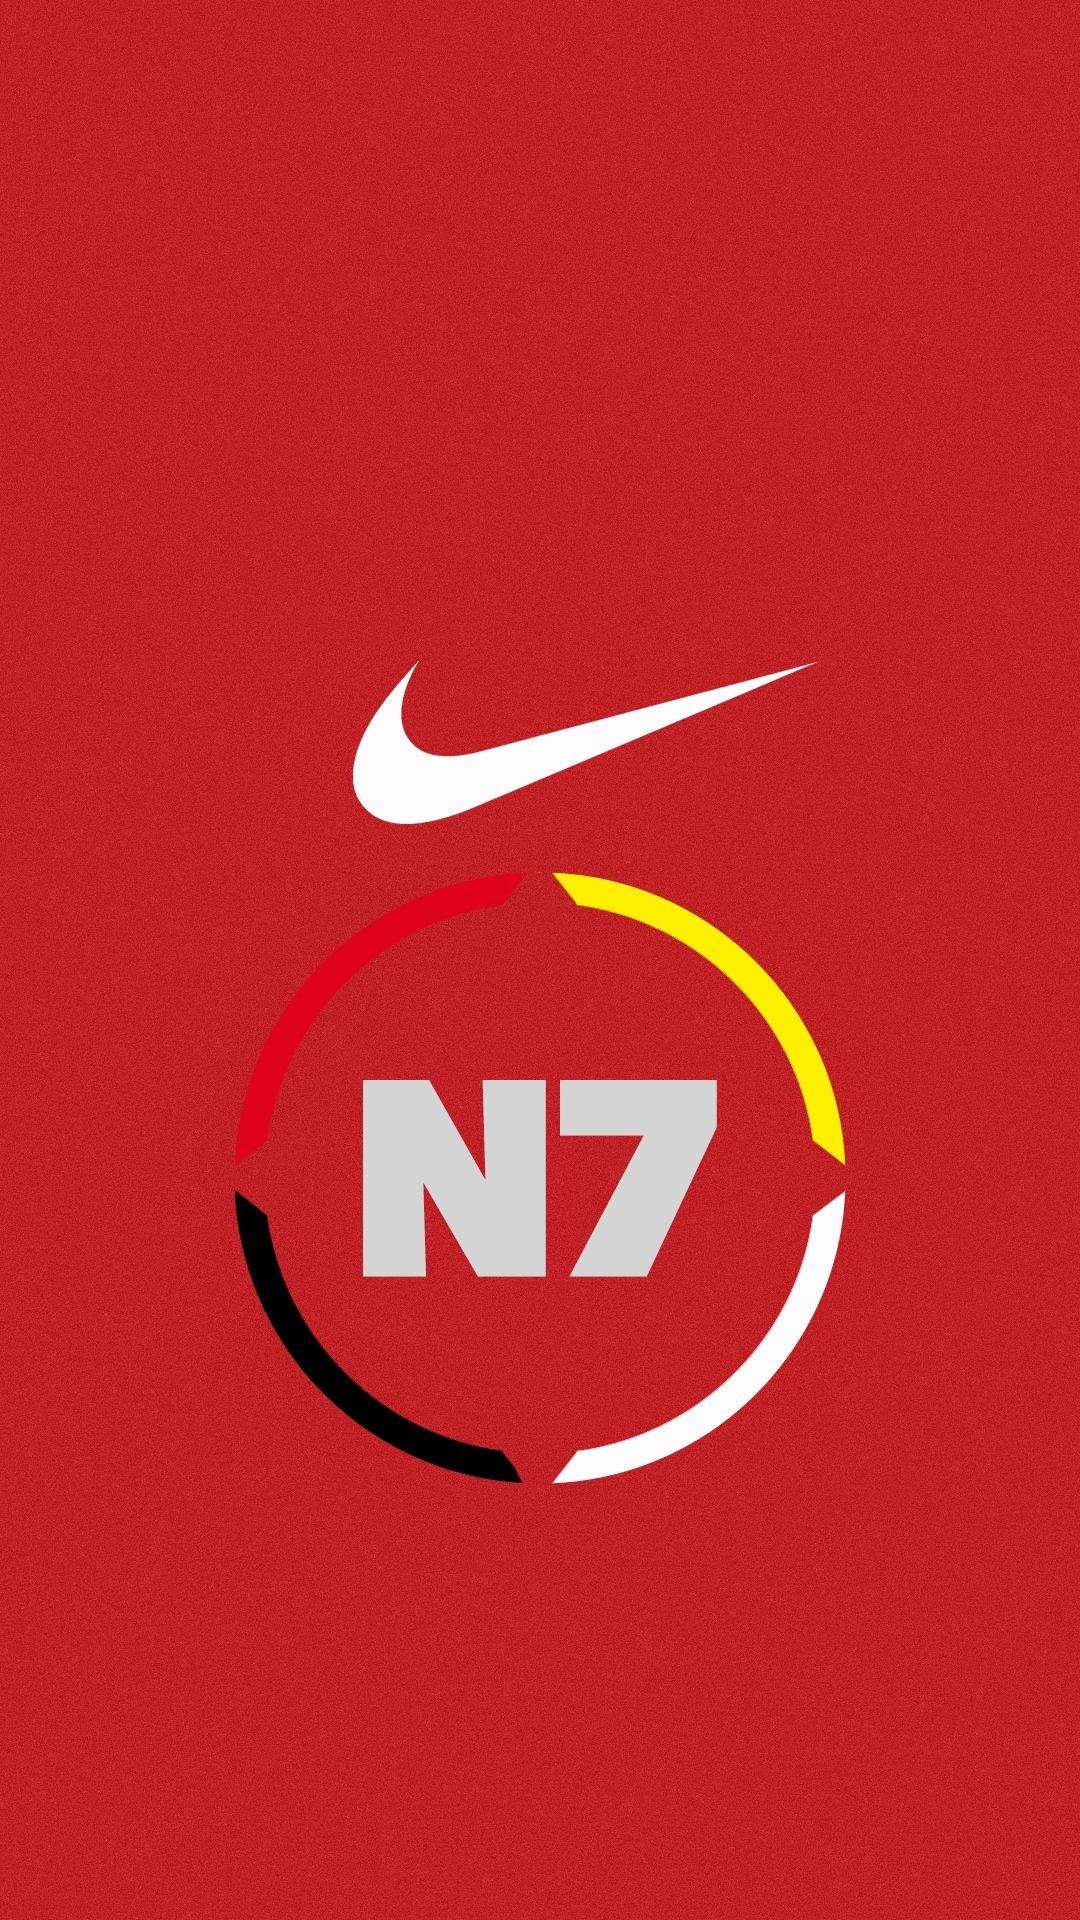 Iphone Nike Wallpaper Hd 78 Images - Graphic Design , HD Wallpaper & Backgrounds